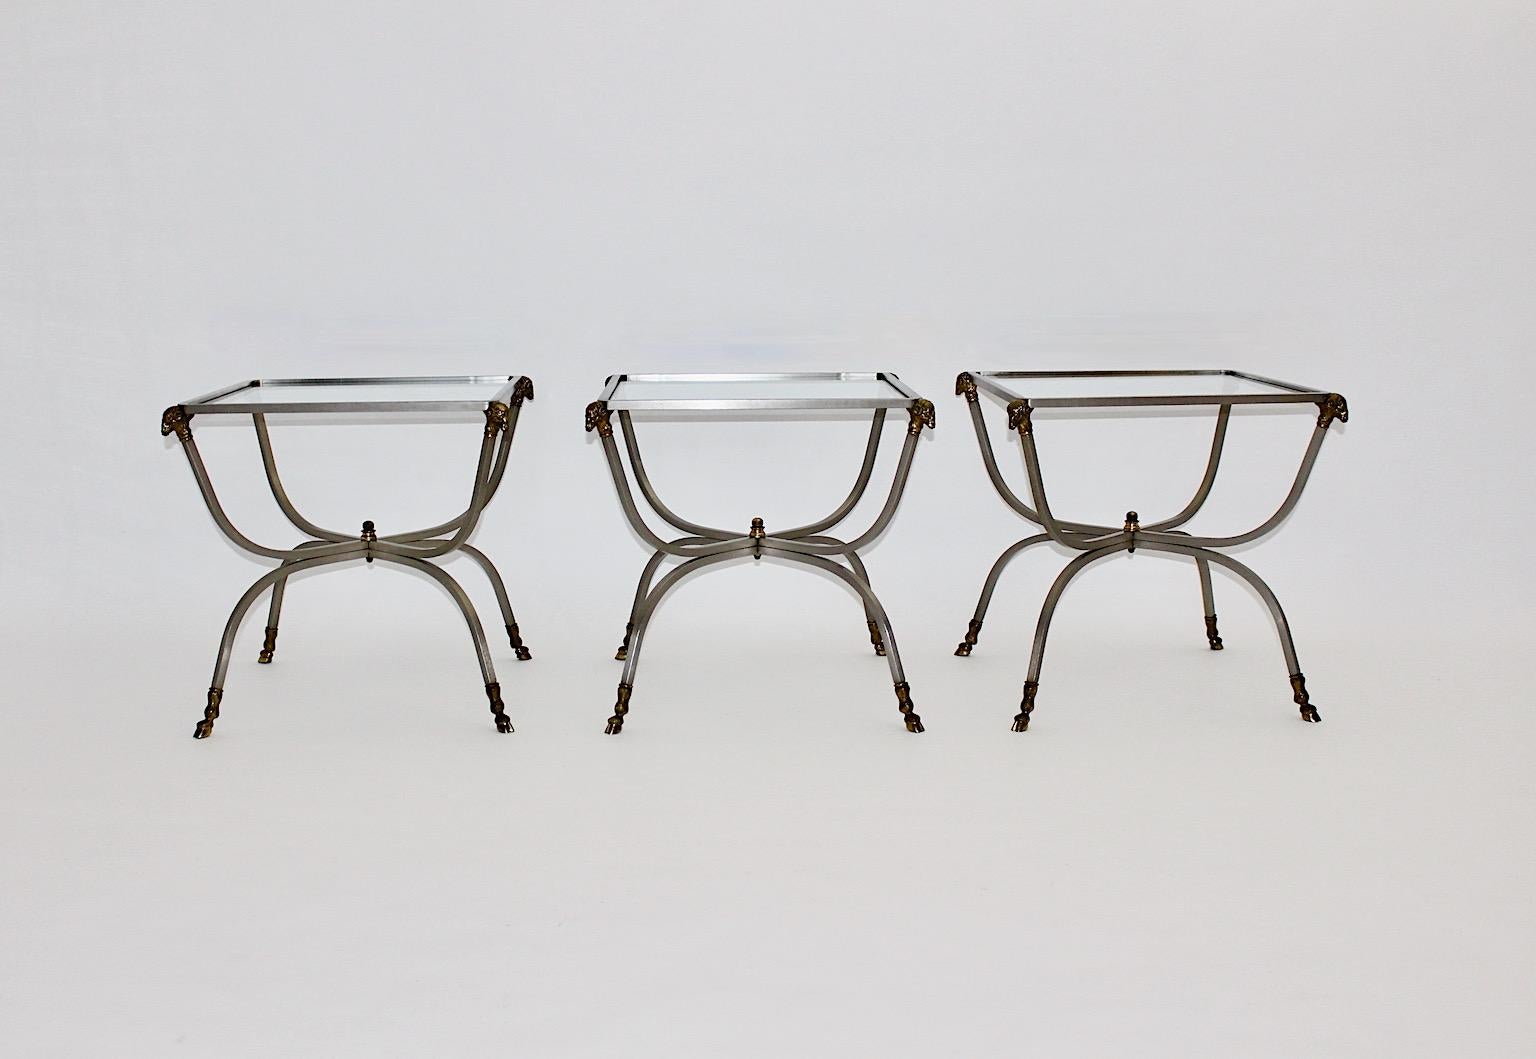 Three modern Hollywood Regency style vintage coffee tables side tables or sofa tables Maison Jansen 1970s France.
Finest quality tables from steel, brass and clear glass by the Paris based interior house Maison Jansen, which created magical and